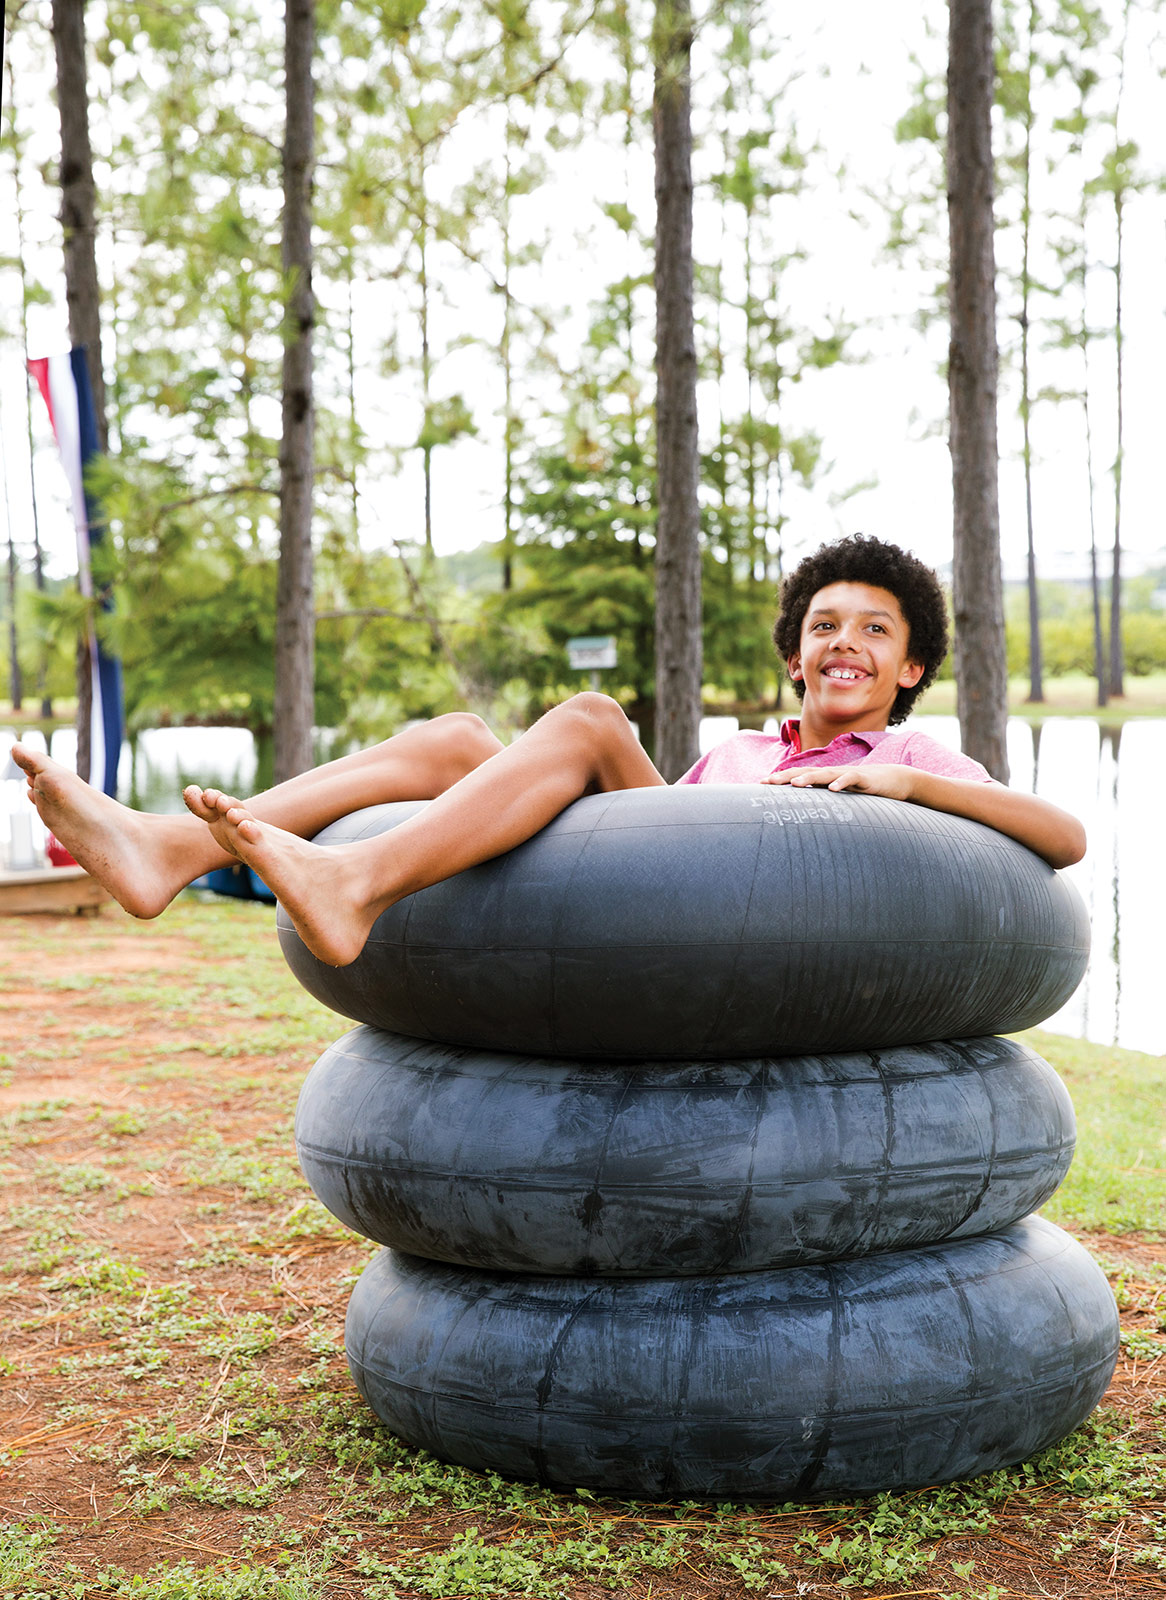 Teenager in inner tube on a summer day by Austin based photographer Buff Strickland